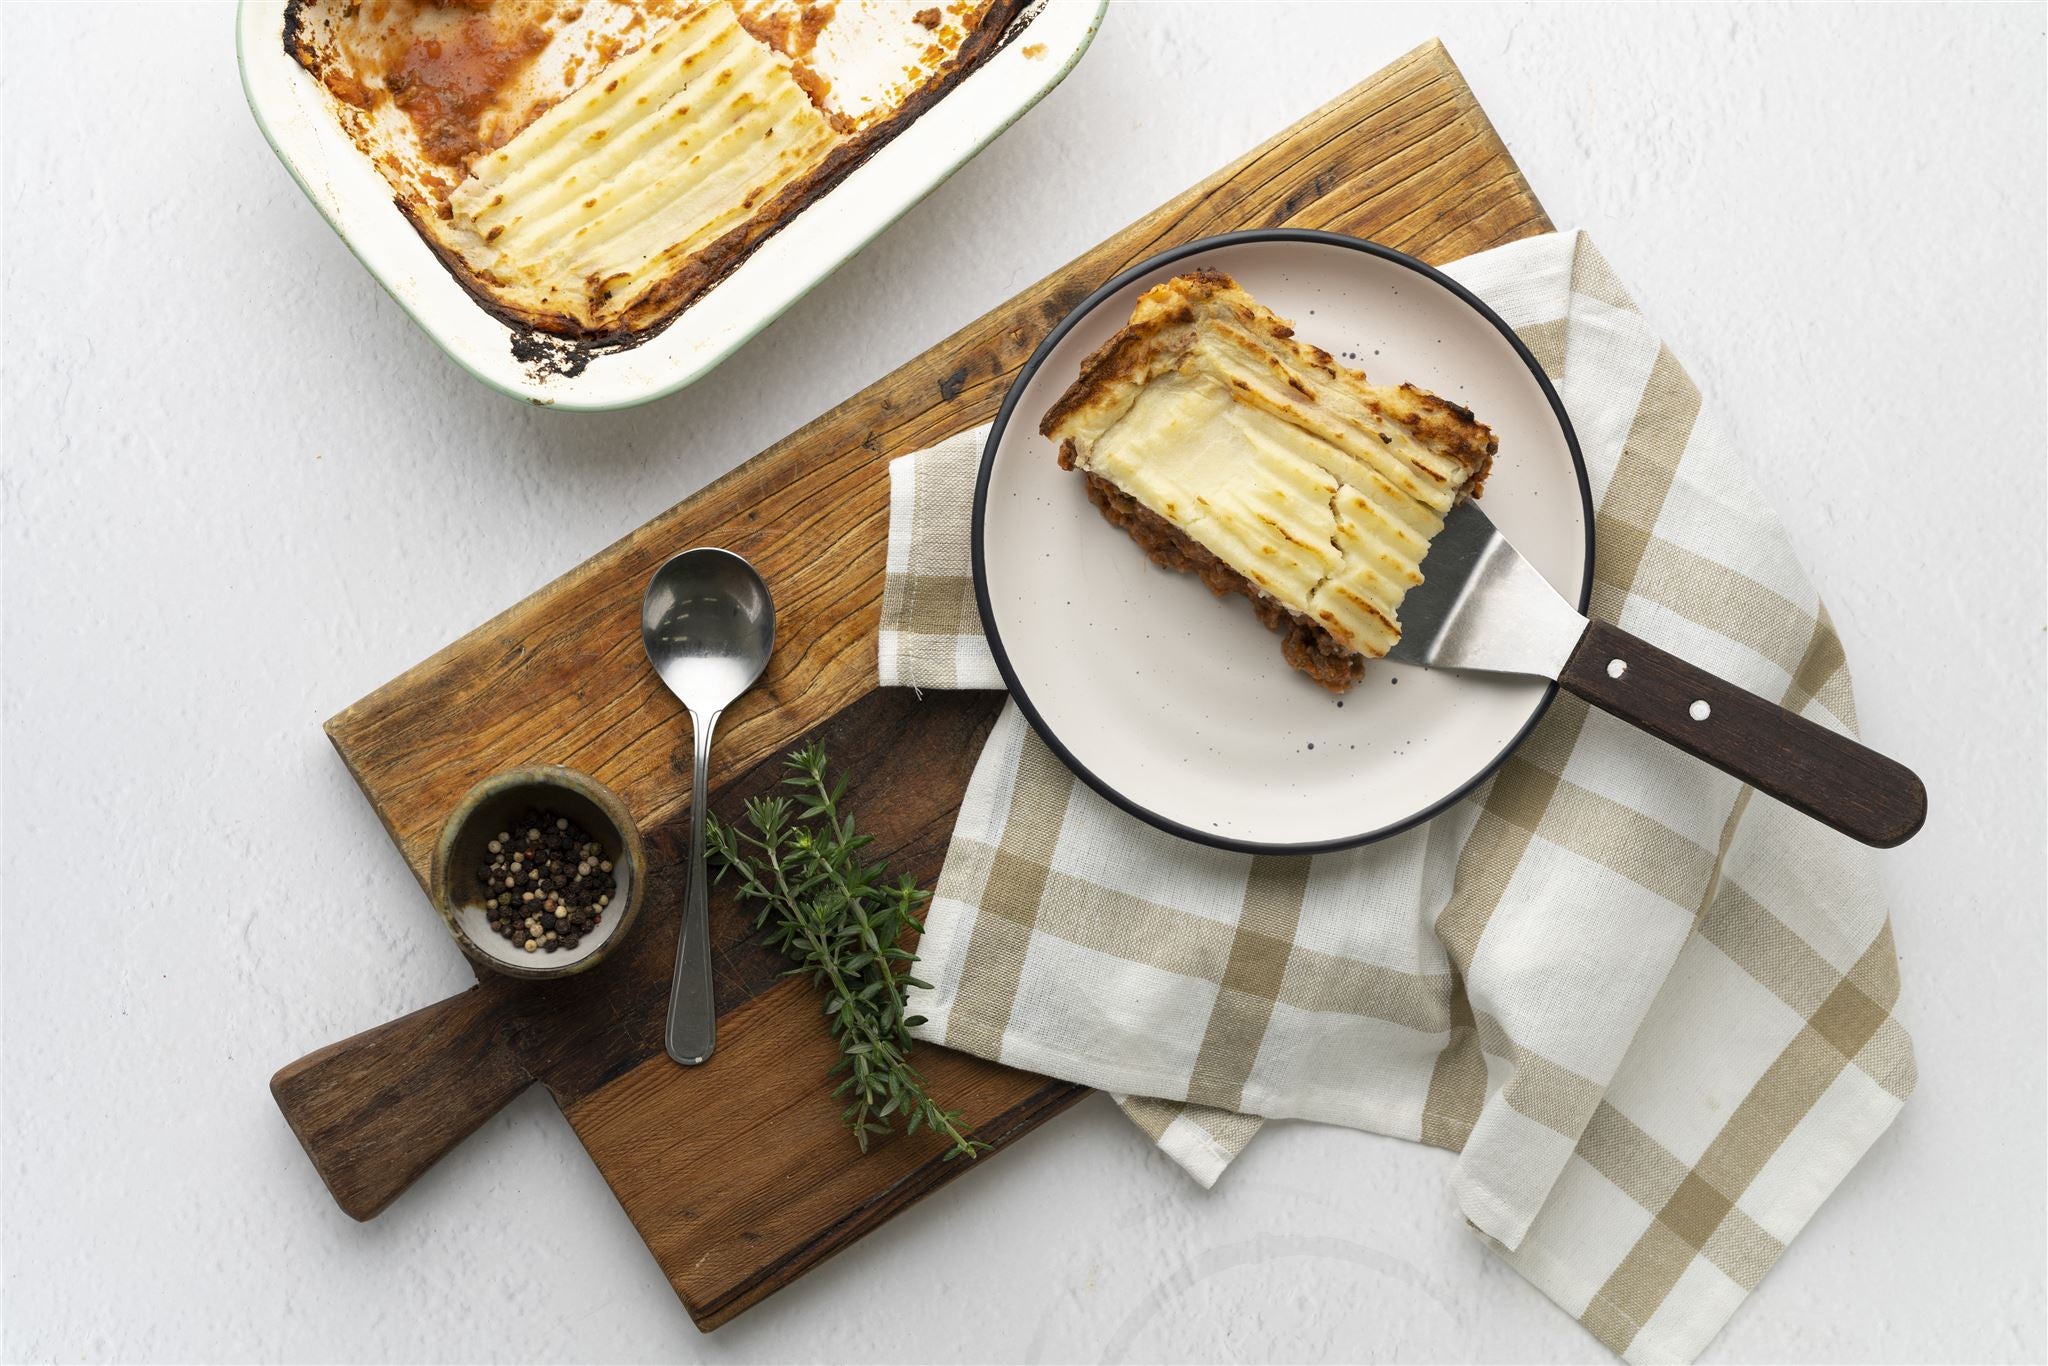 A mouthwatering snapshot of our Shepherd's Pie, brimming with savory flavors and topped with golden cheese, perfect for a family meal